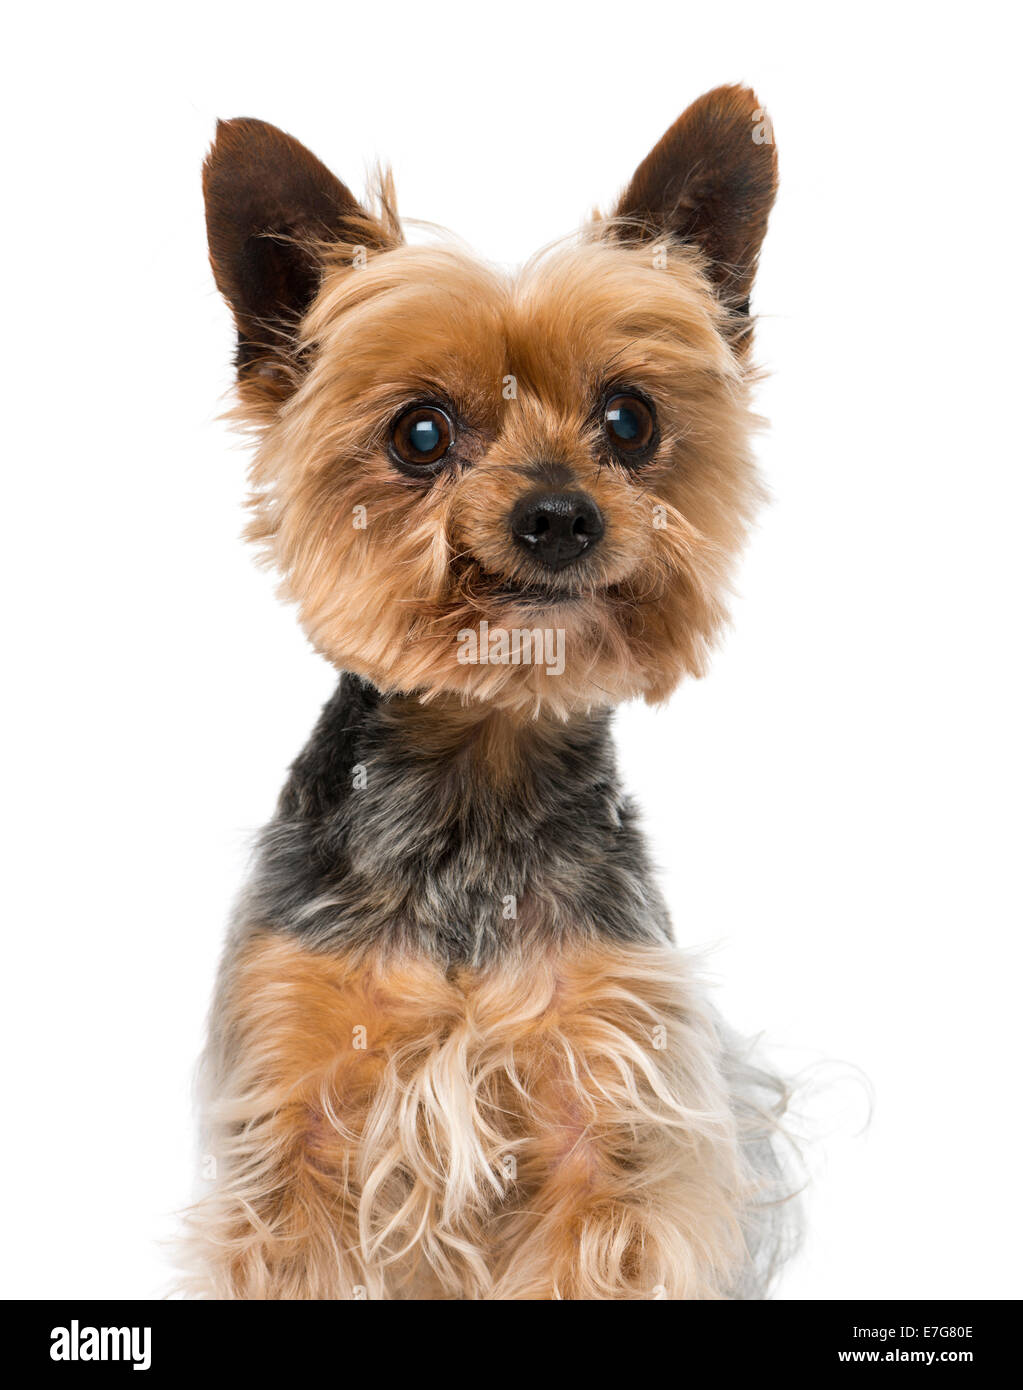 Old Yorkshire terrier (13 years old) against white background Stock Photo